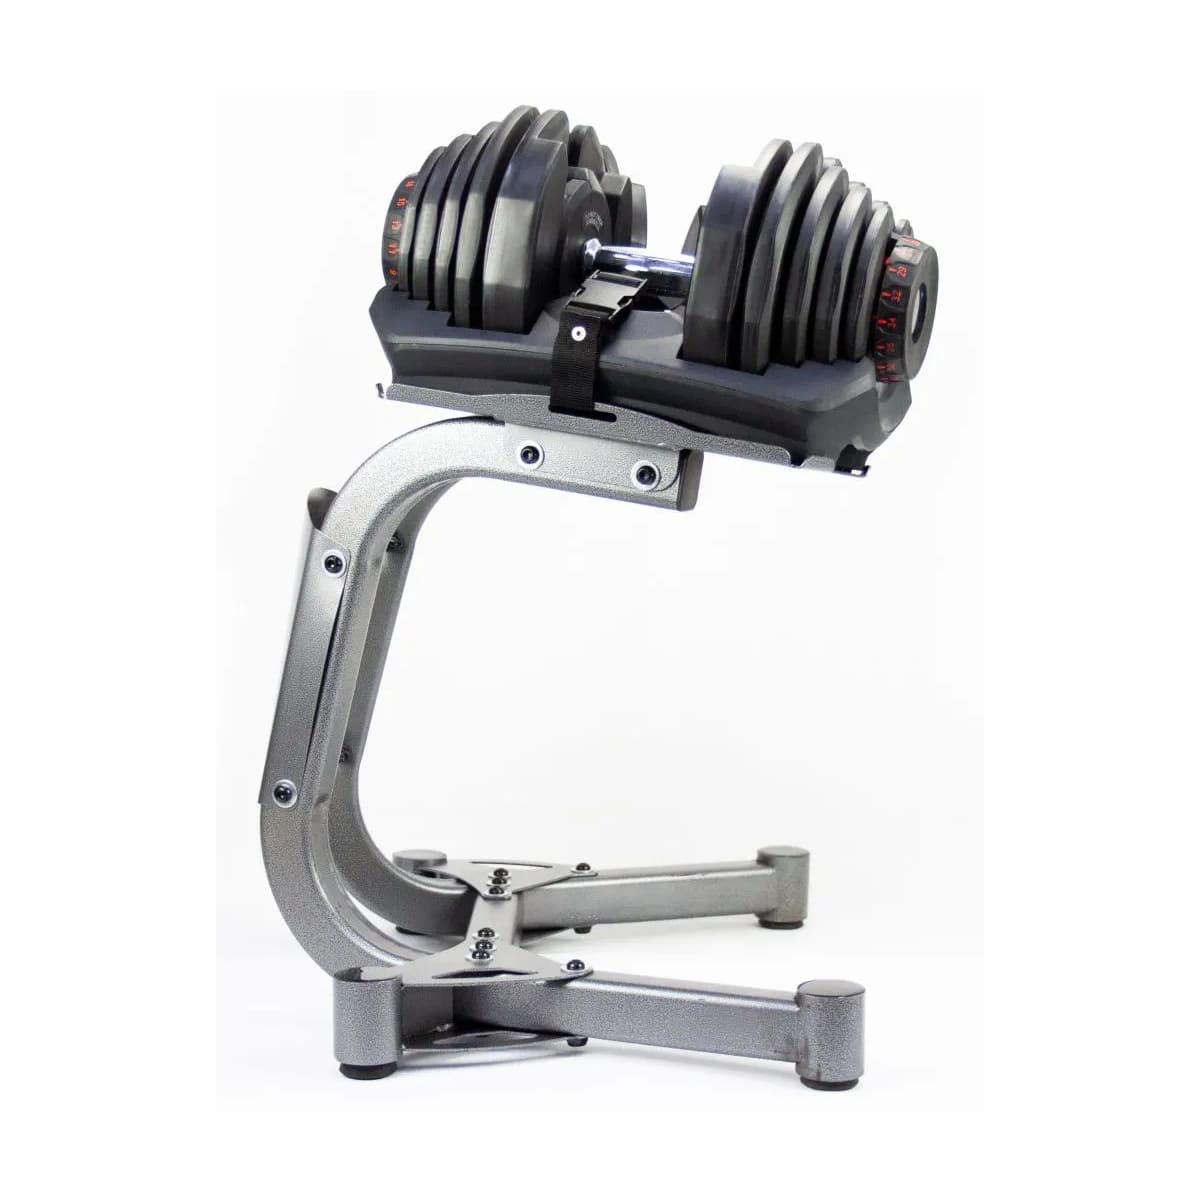 Murano Adjustable SelectTech Dumbbell with Stand, 80 Kg